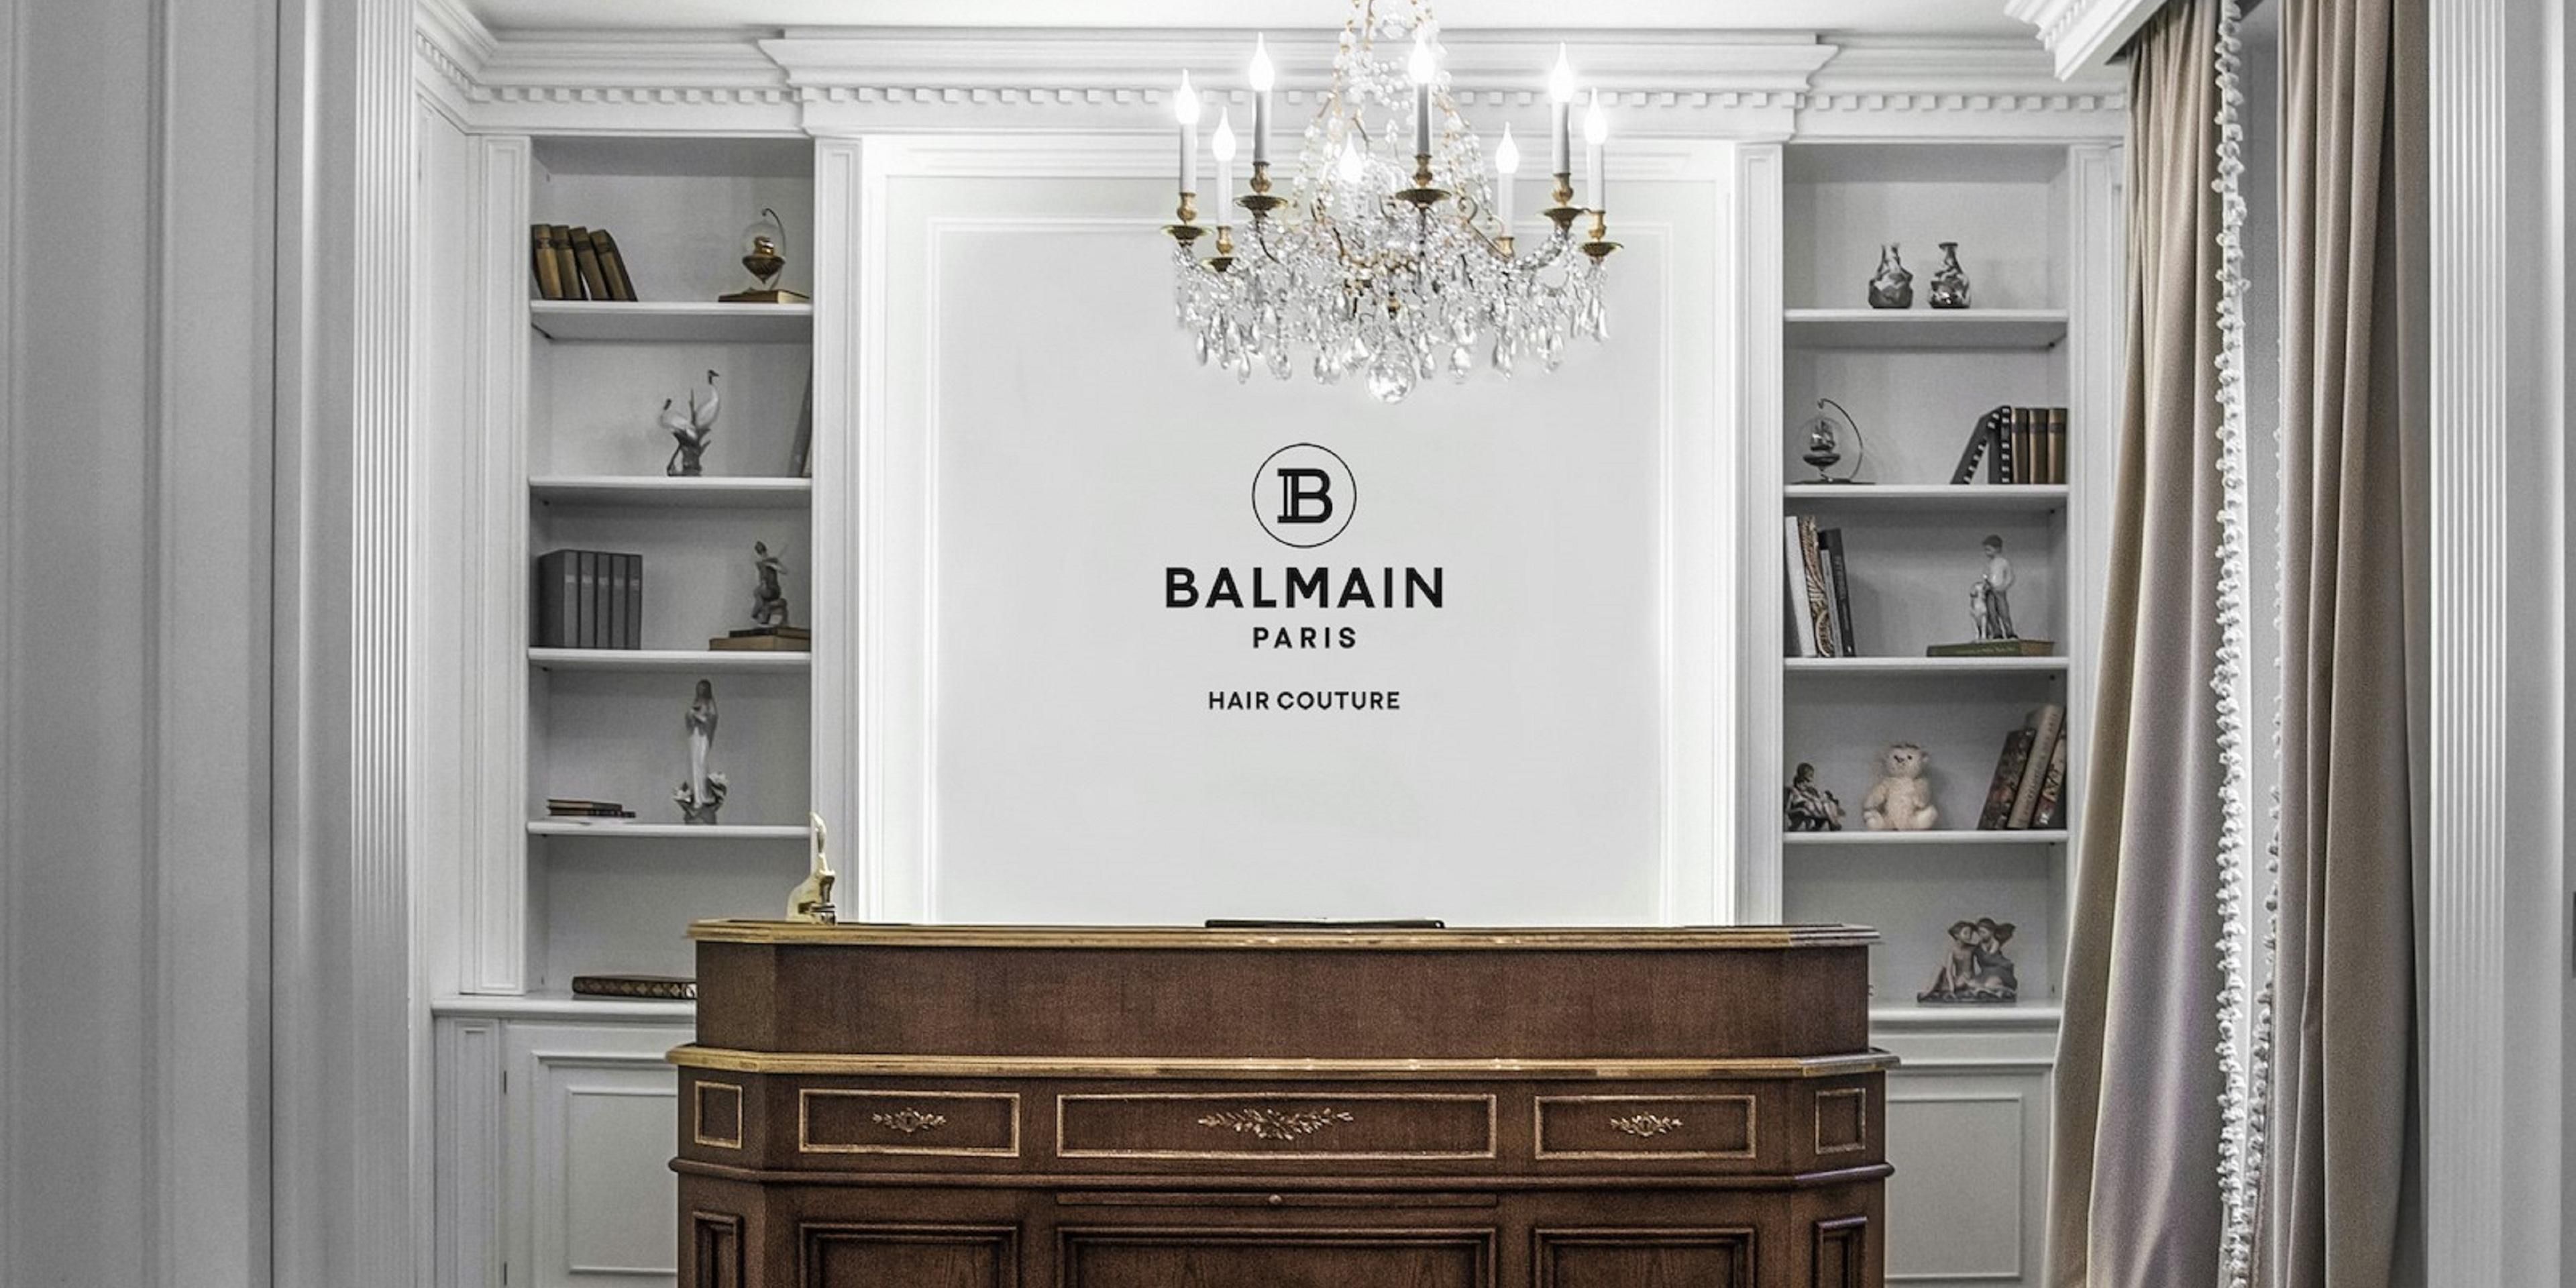 With Balmain Hair Couture’s rich heritage and ANJ Wellness’s exceptional ambiance, our spa offers unparalleled beauty treatments: an exclusive access to professional high-end cosmetic brands Paoma & Cellcosmet and a hair salon by Balmain Hair Couture.